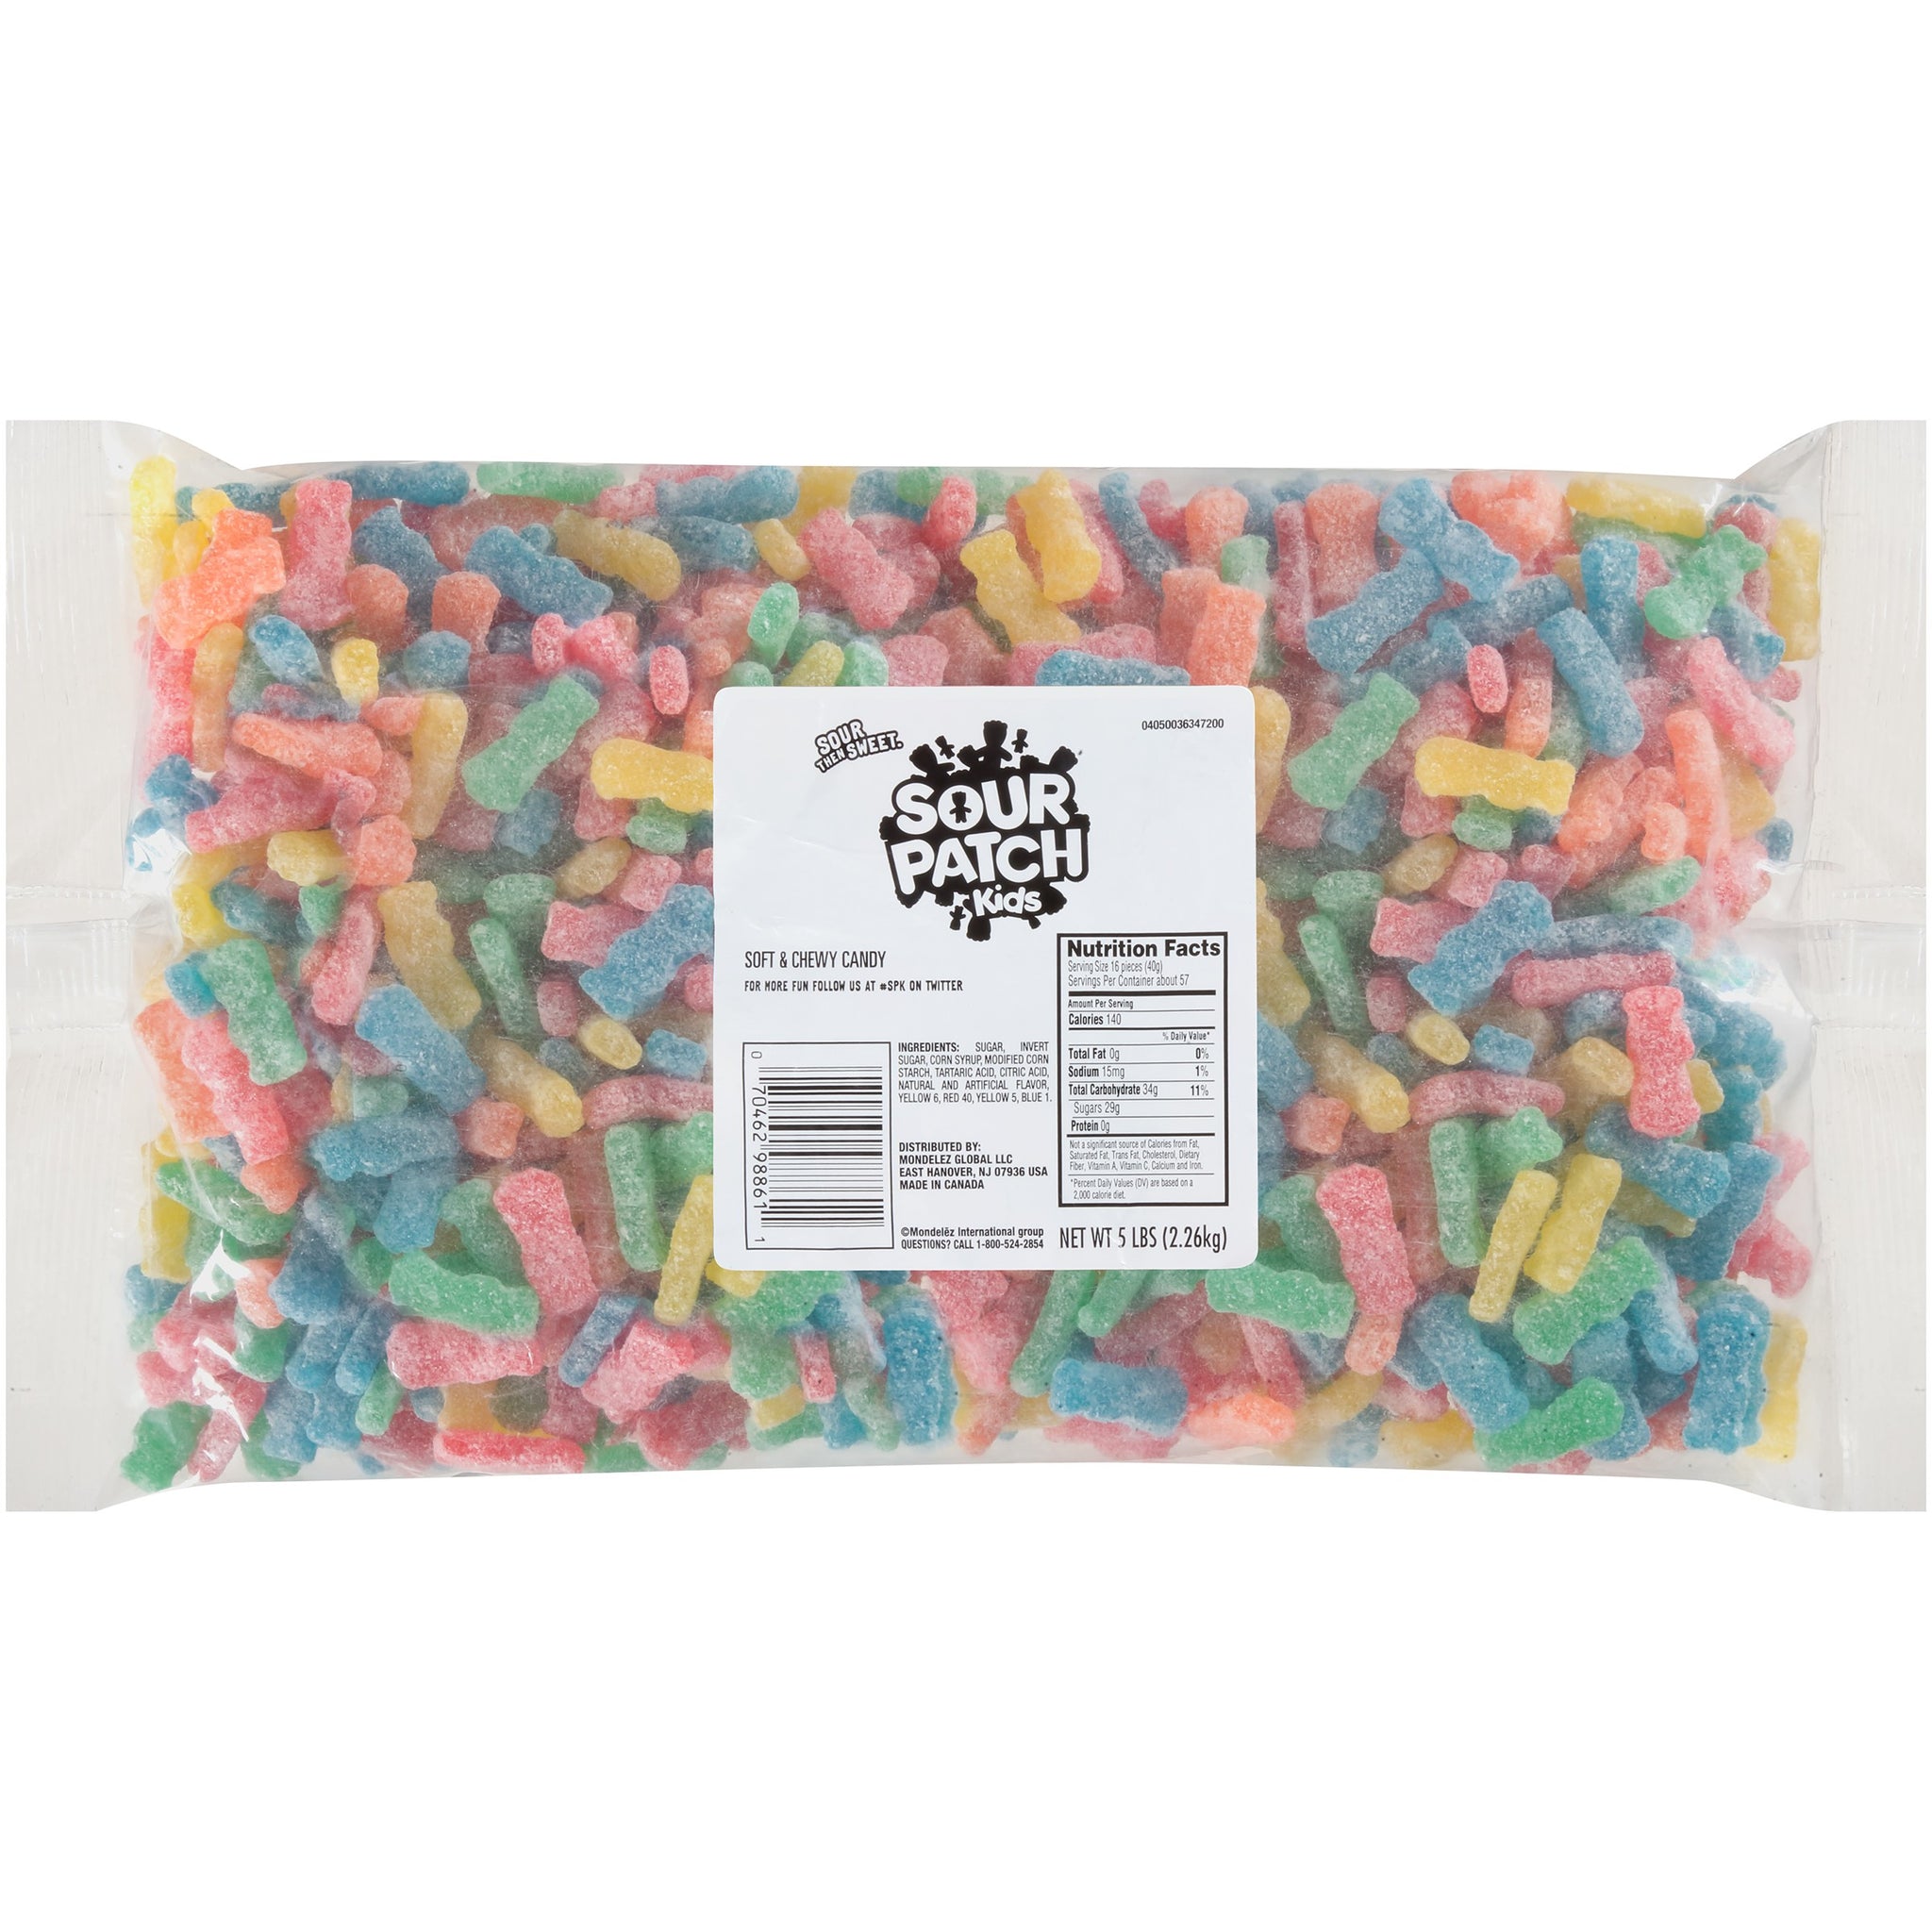 Sour Patch Kids Soft & Chewy Candy - 3.5 oz. Theater Box